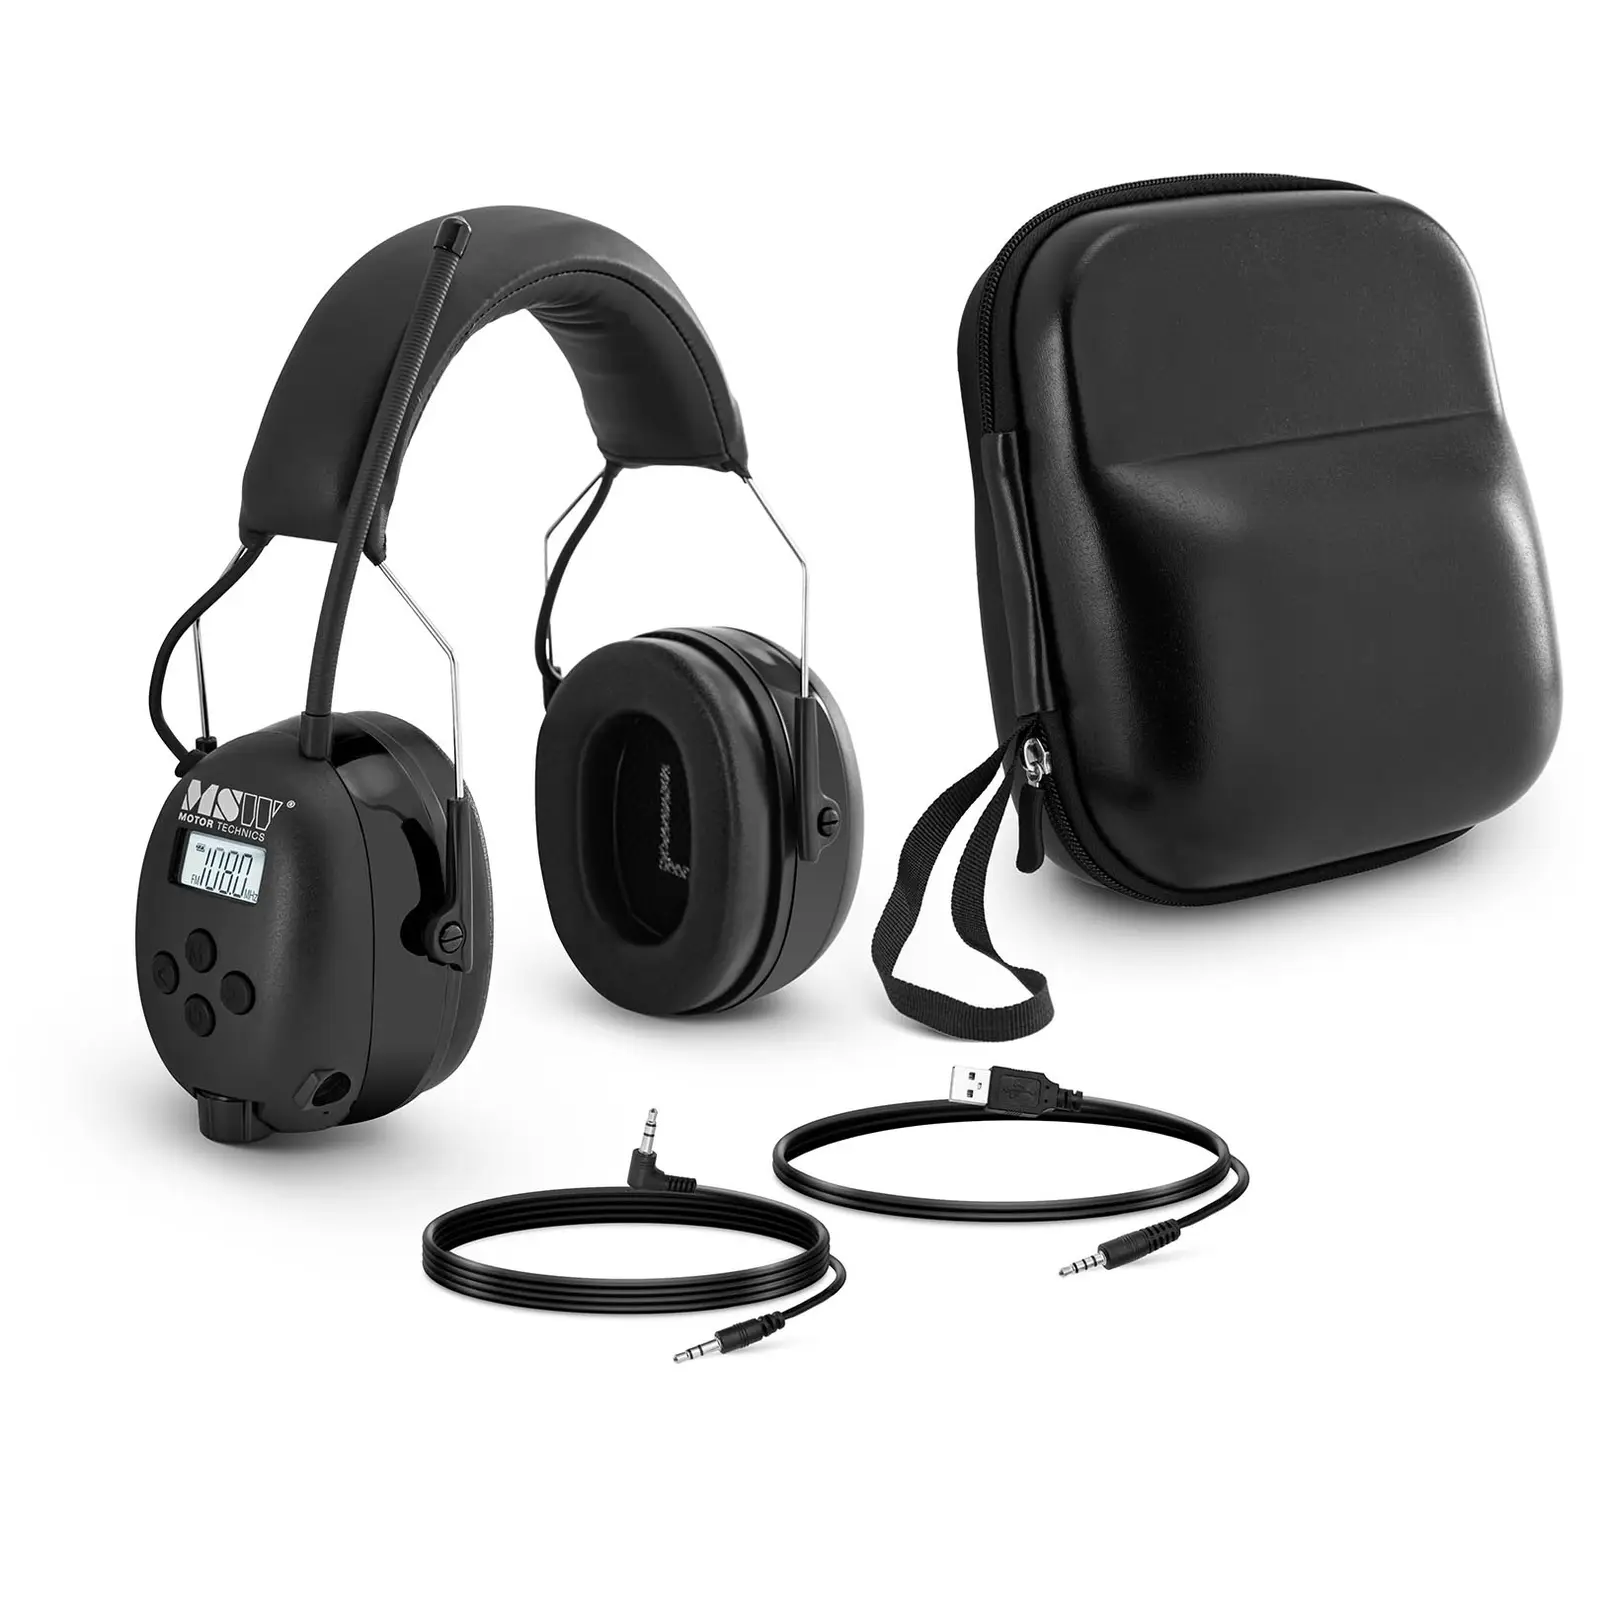 Bluetooth Noise Cancelling Headphones - Microphone - LCD Display - Rechargeable Battery - Black